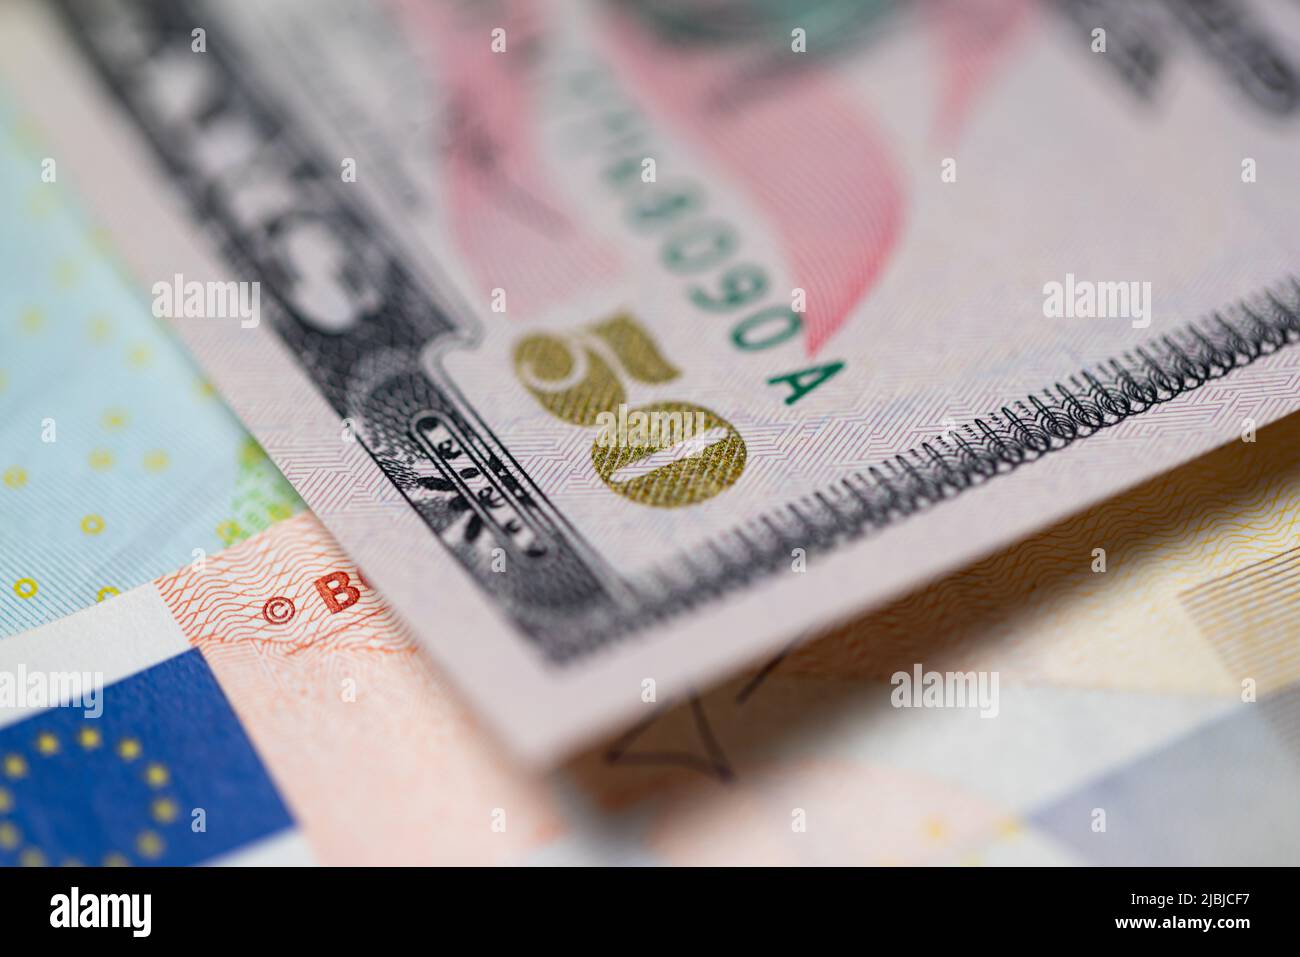 Fifty dollar bills next to euro bill. Currency exchange concept from euro to US dollar money. Stock Photo